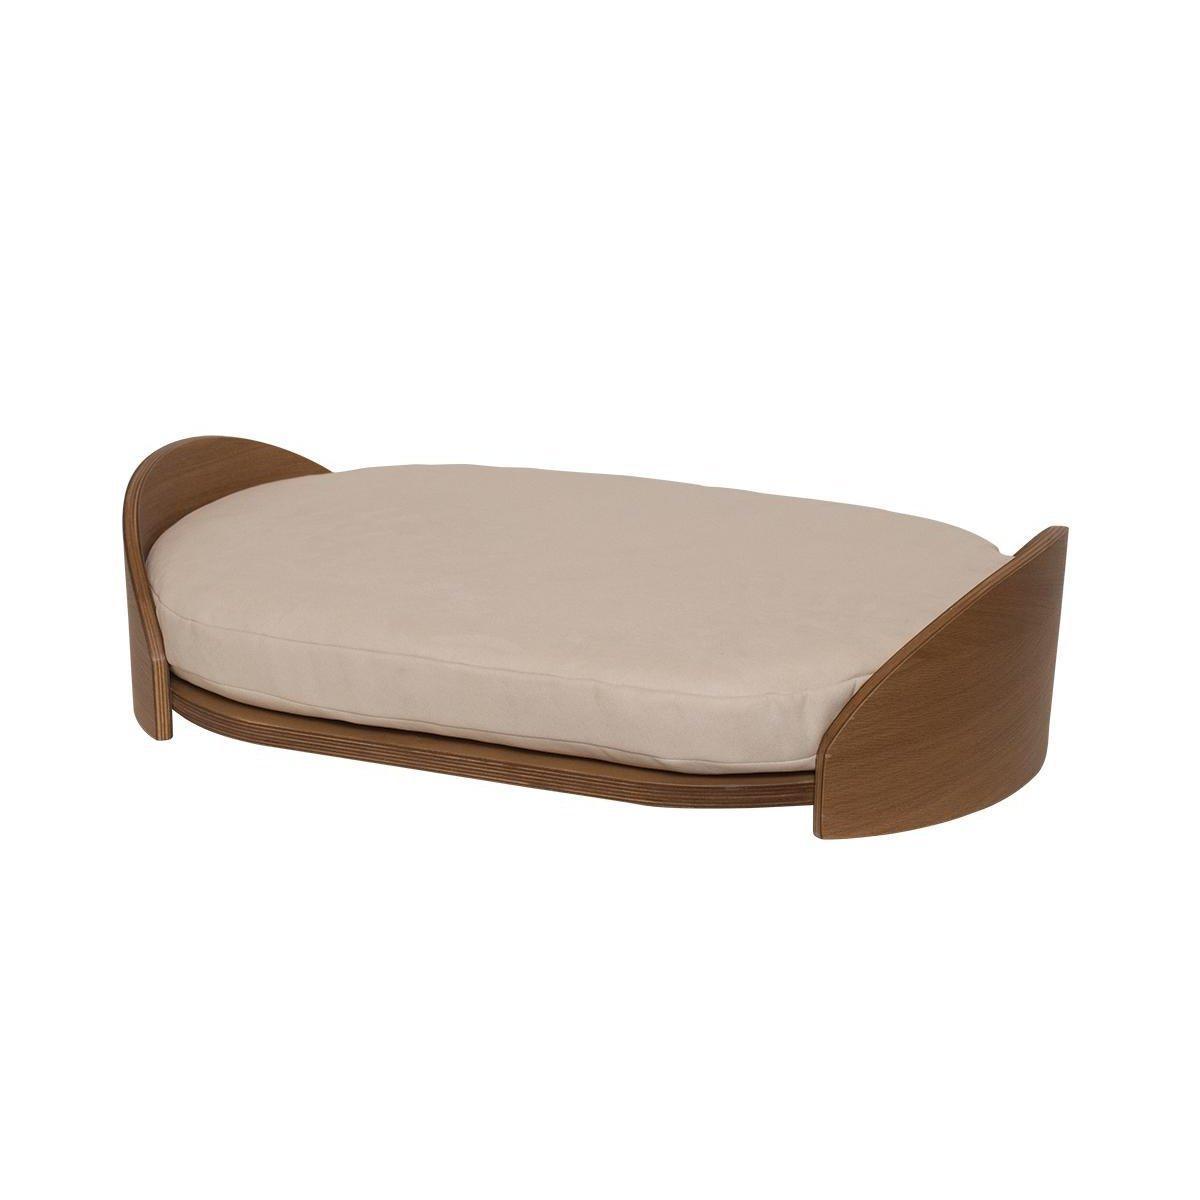 Cat Bed Chios - Cat Beds - Luxury Dog House - ewoodcollection.com